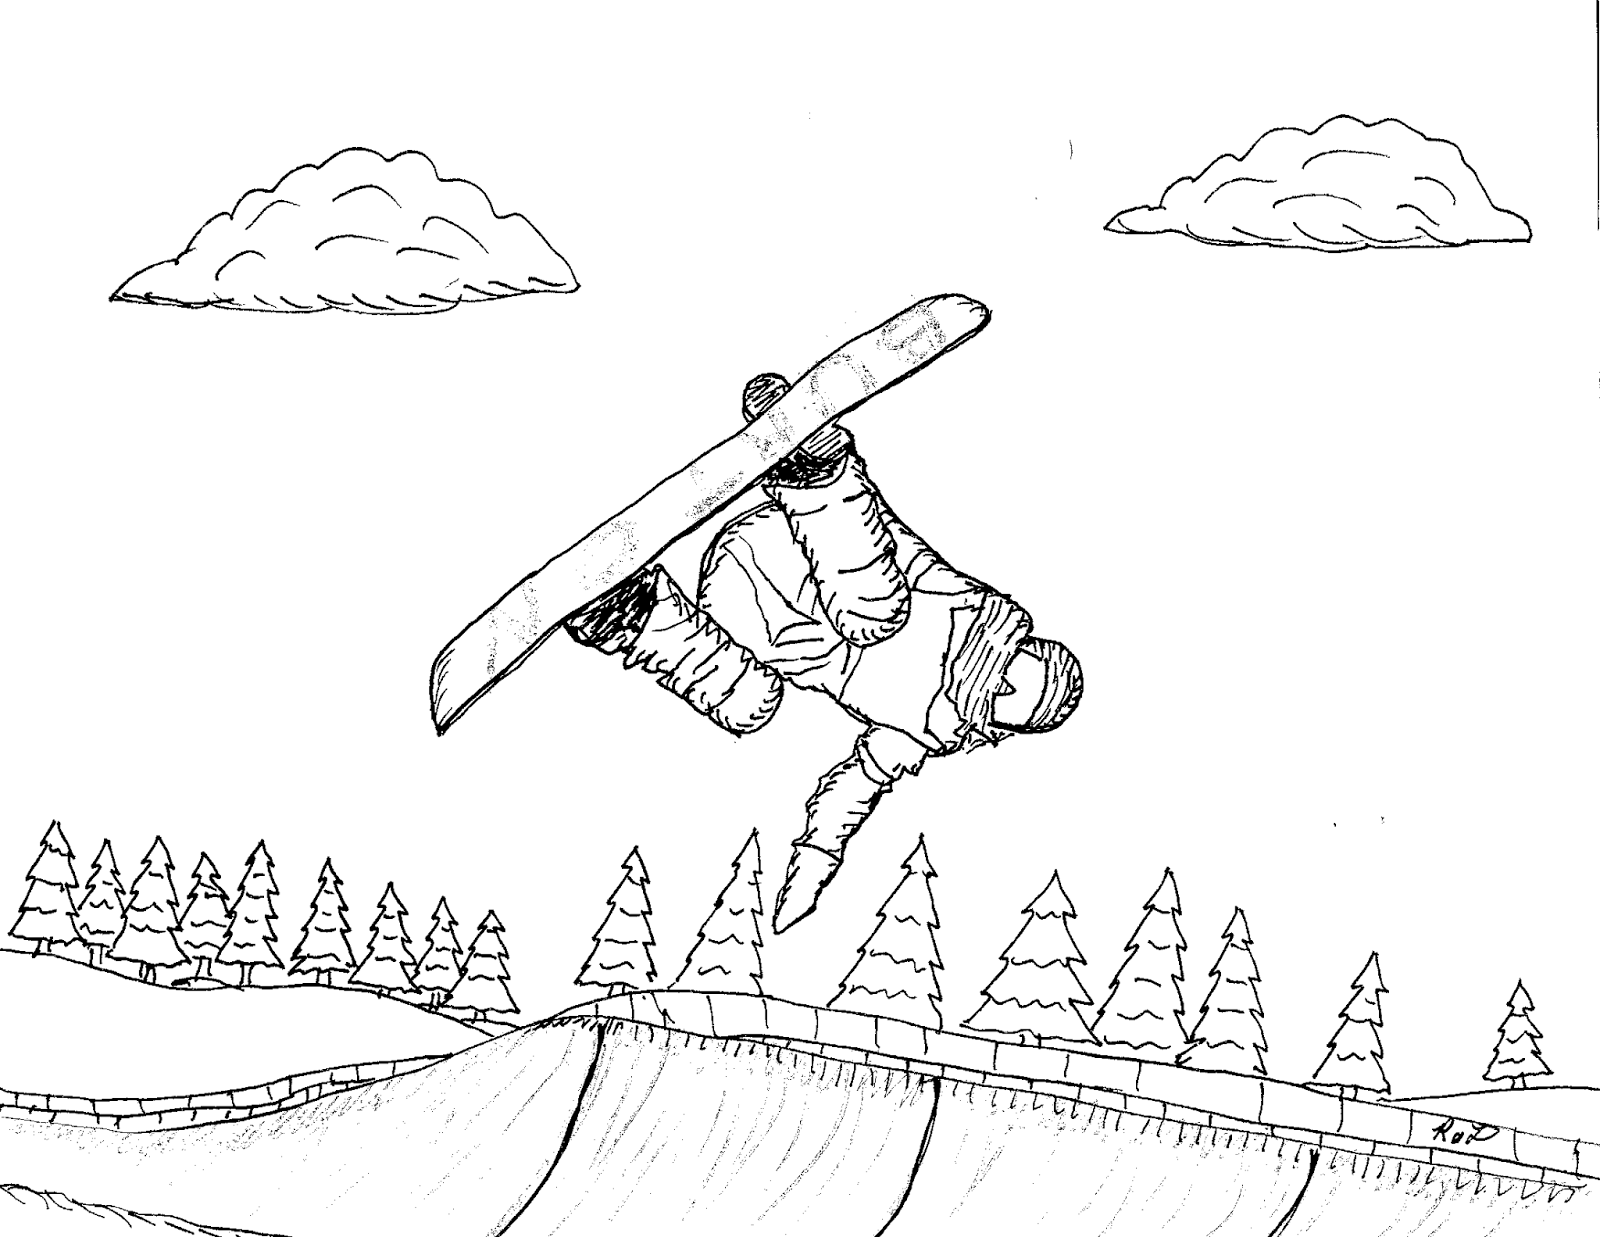 Robin's Great Coloring Pages: Chloe Kim Snowboarder at the Winter ...